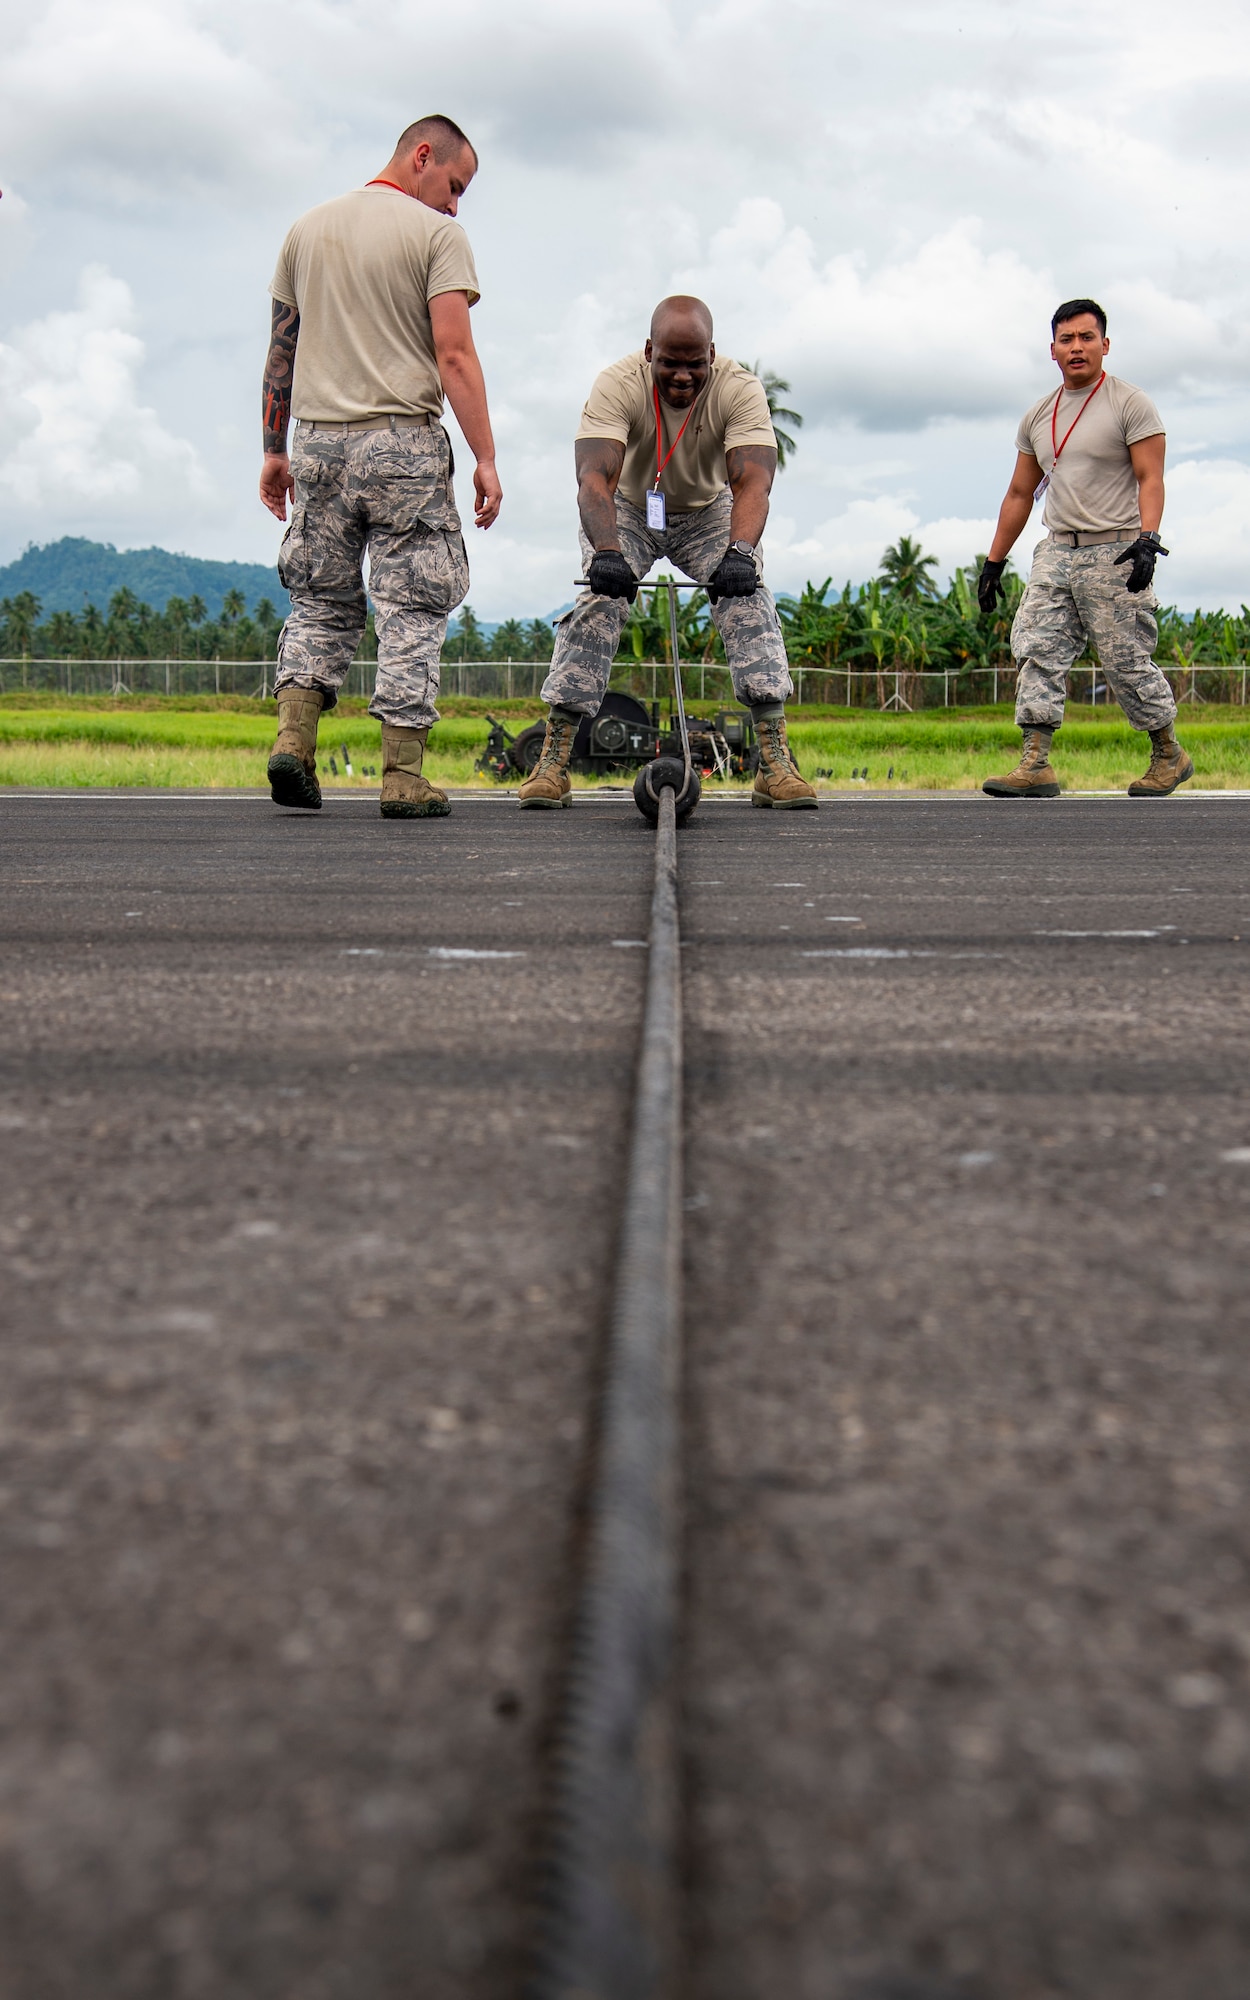 U.S. Air Force Tech. Sgt. DeMarco Poole, a 35th Civil Engineer Squadron electrical system craftsman from Misawa Air Base, Japan, spaces out the rollers on the mobile aircraft arresting system (MAAS) cable at the Sam Ratulangi International Airport, Manado, Indonesia, June 17, 2019. The small rollers keep the cable up off the runway so the hook can grab it. Six MAAS technicians forward deployed to Indonesia to support Cope West 19.The MAAS is designed to ensure pilots land and take-off safely in the event of an in-flight emergency. (U.S. Air Force photo by Staff Sgt. Melanie A. Hutto)